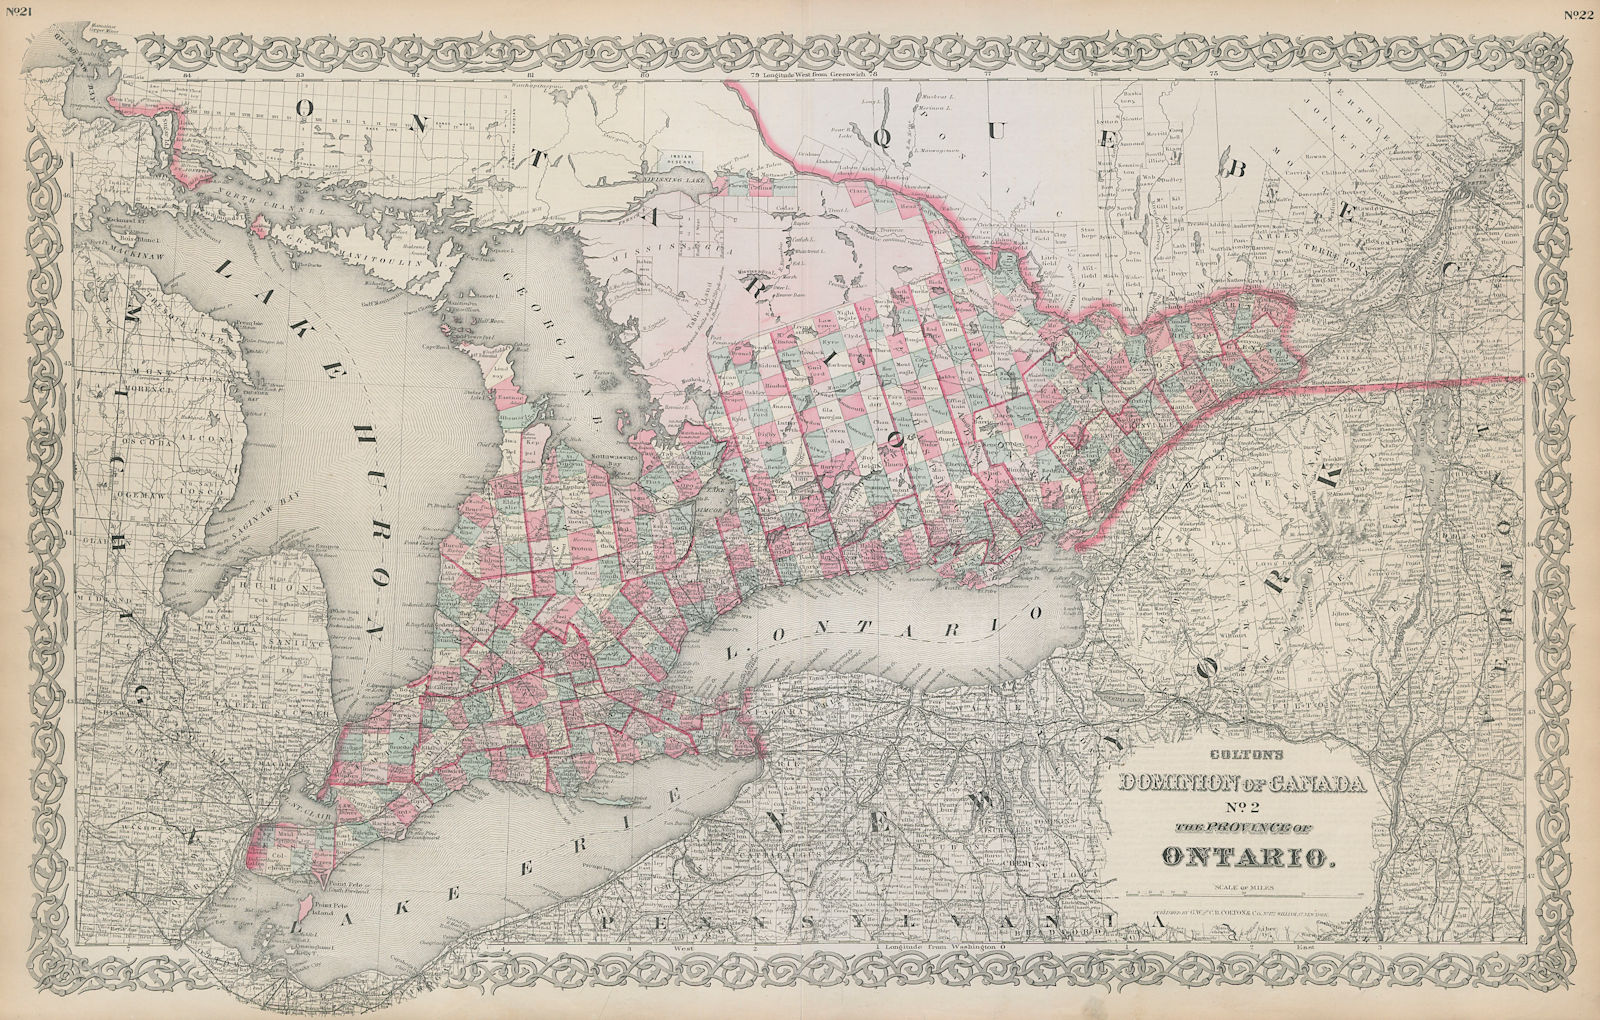 Associate Product Colton's Dominion of Canada No. 2 Ontario. Great Lakes. Upper New York 1869 map